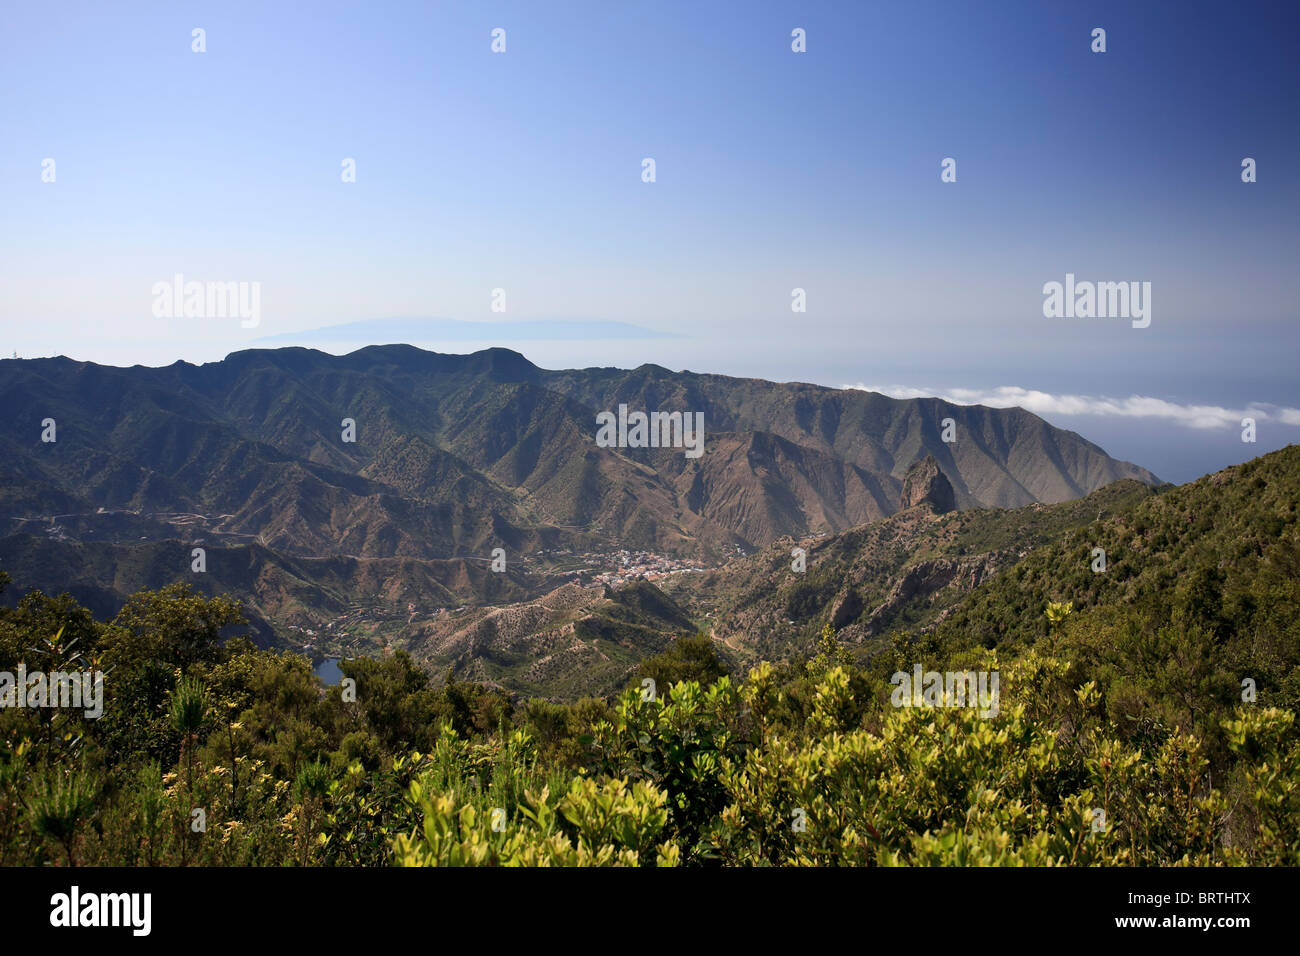 Canary Islands, La Gomera, Ravines and view of Vallehermoso town Stock Photo